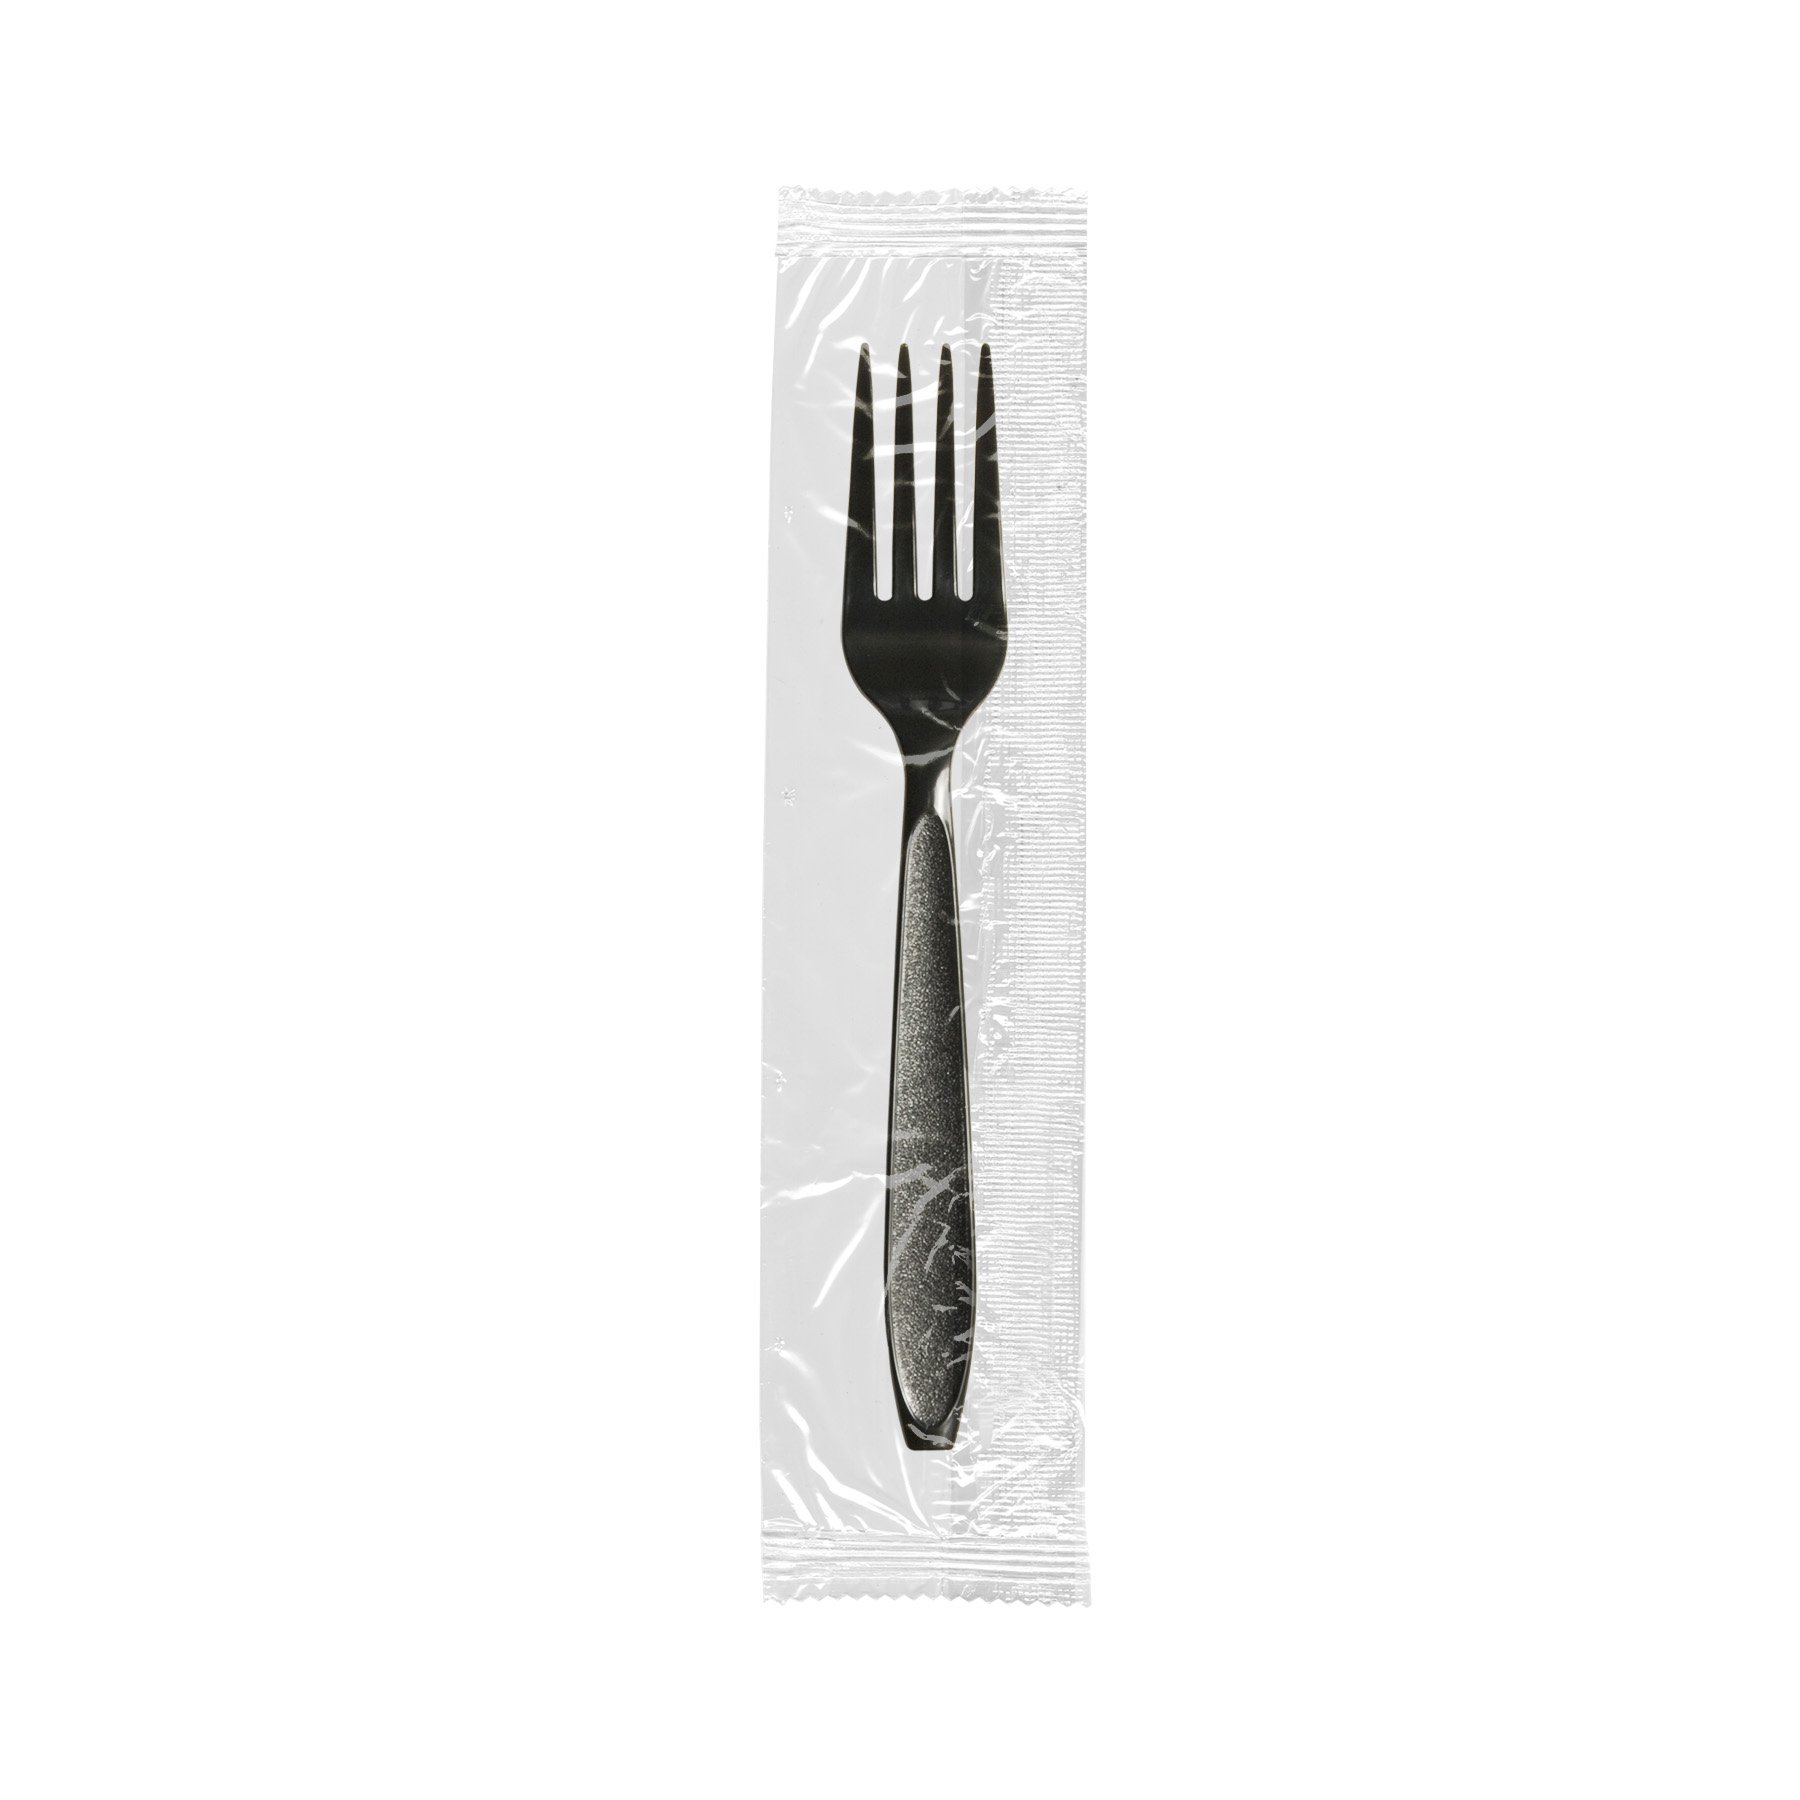 Boxed Reliance Medium Weight Cutlery, Fork, Black, 1,000/Case